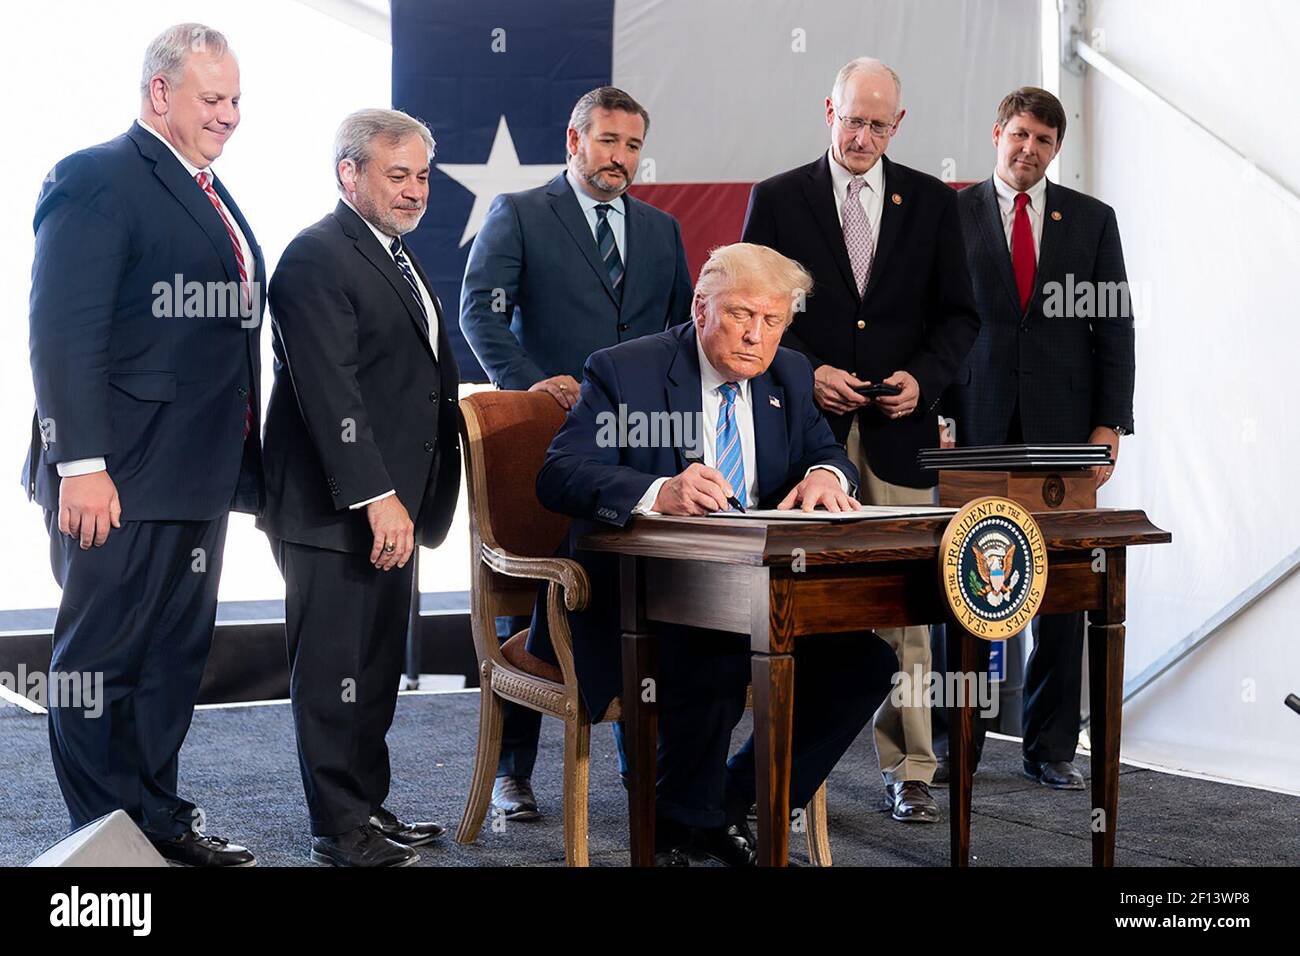 President Donald Trump joined by Secretary of Interior David Bernhardt left Secretary of Energy Dan Brouillette Senator Ted Cruz U.S. Rep. Mike Conaway R-Texas and U.S. Rep. Jodey Arrington R-Texas signs presidential permits Wednesday July 29 2020 at the Double Eagle Oil Rig in Midland Texas. Stock Photo